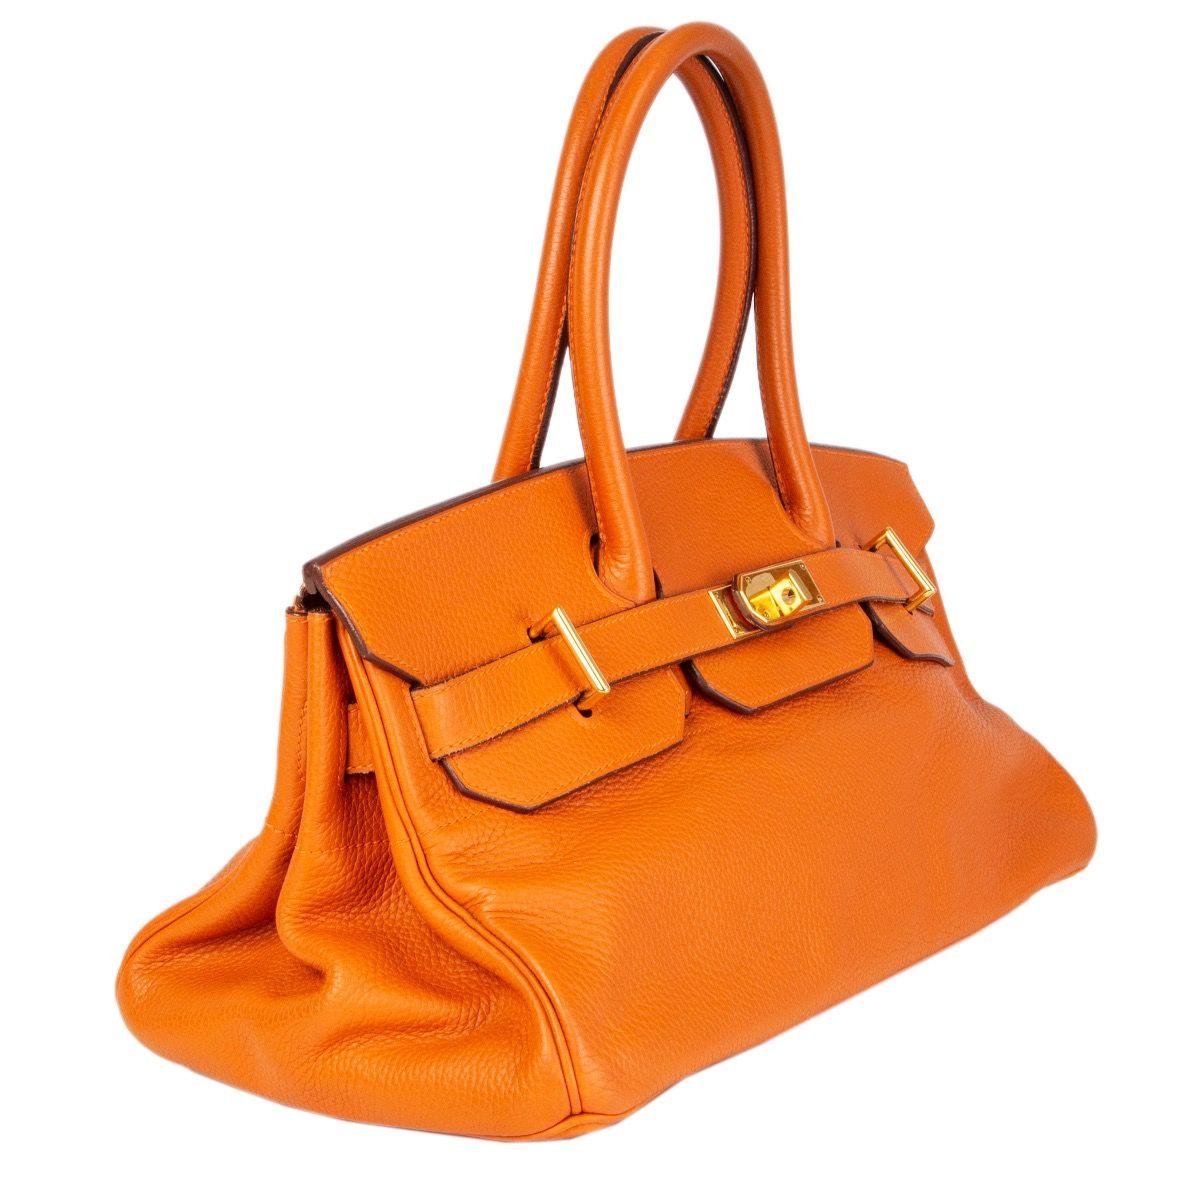 Hermès 'JPG I Shoulder Birkin' bag in orange Taurillon Clemence leather with Palladium hardware. Lined in Chevre (goat skin). Has been carried and is in excellent condition. Lock is missing. Comes with key, clochette and dustbag. 

Height 17cm